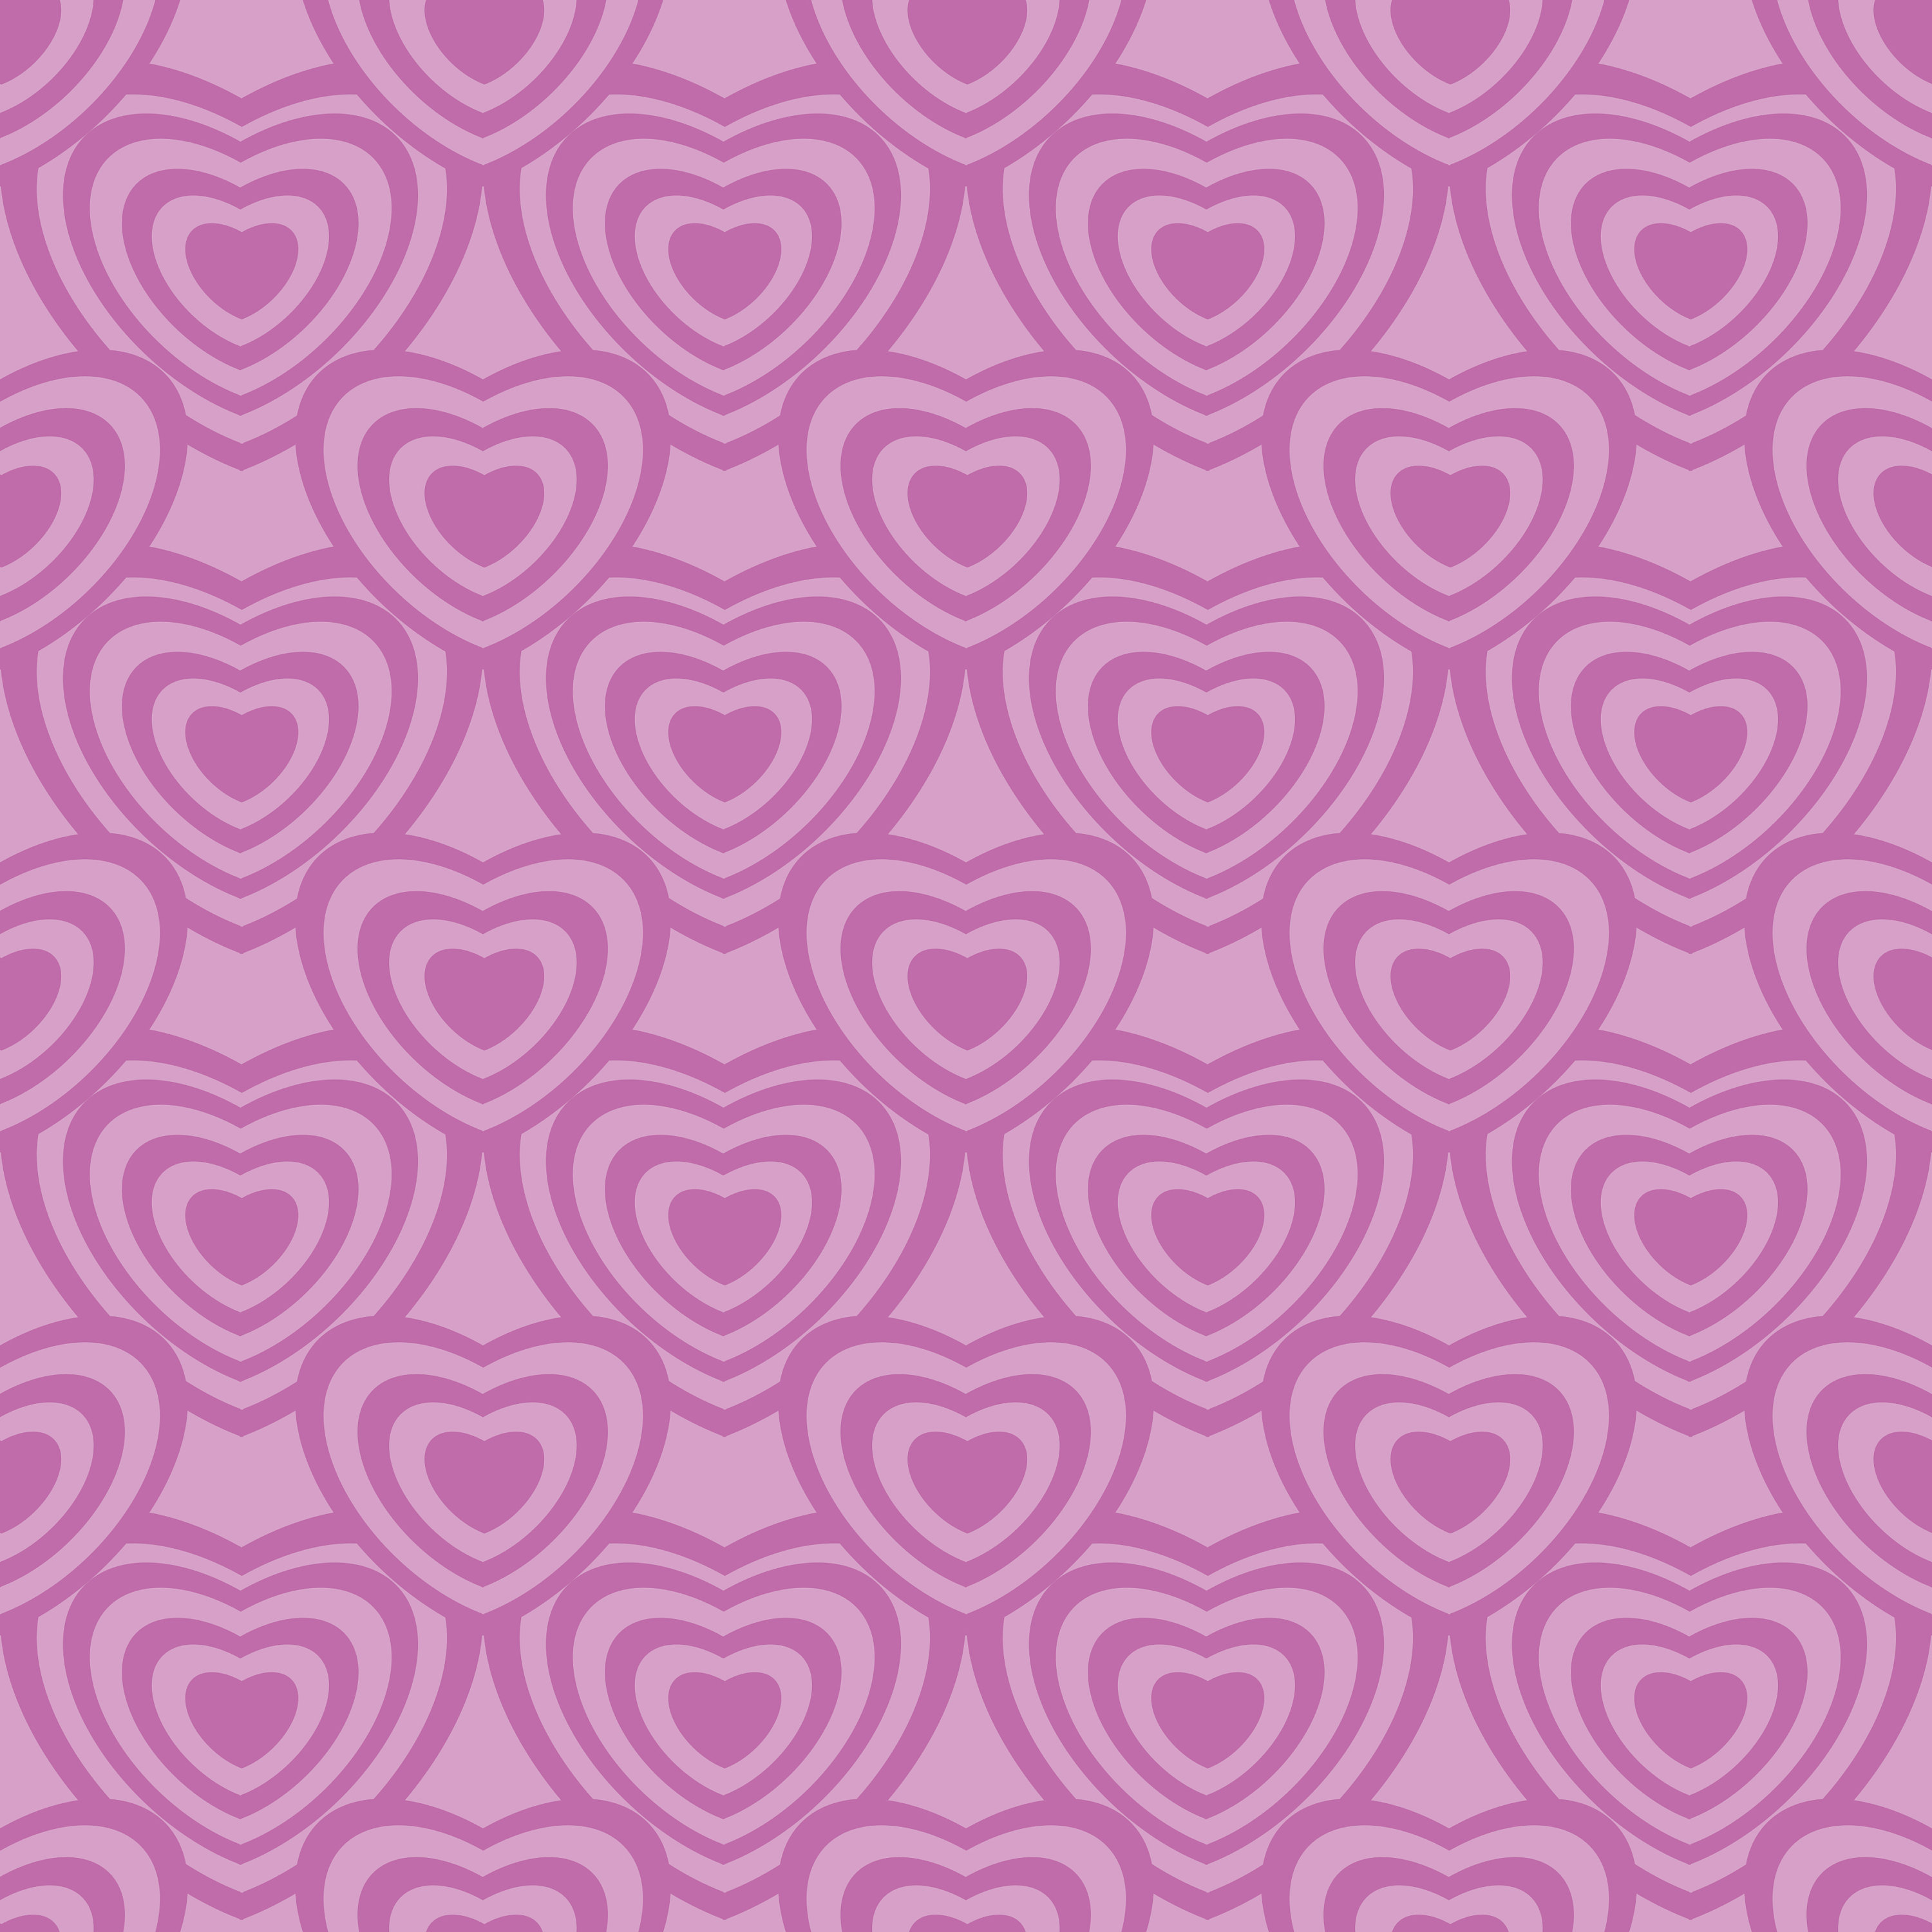 Y2k Heart 2000s Trend Pink Valentines Hearts Seamless Repeat